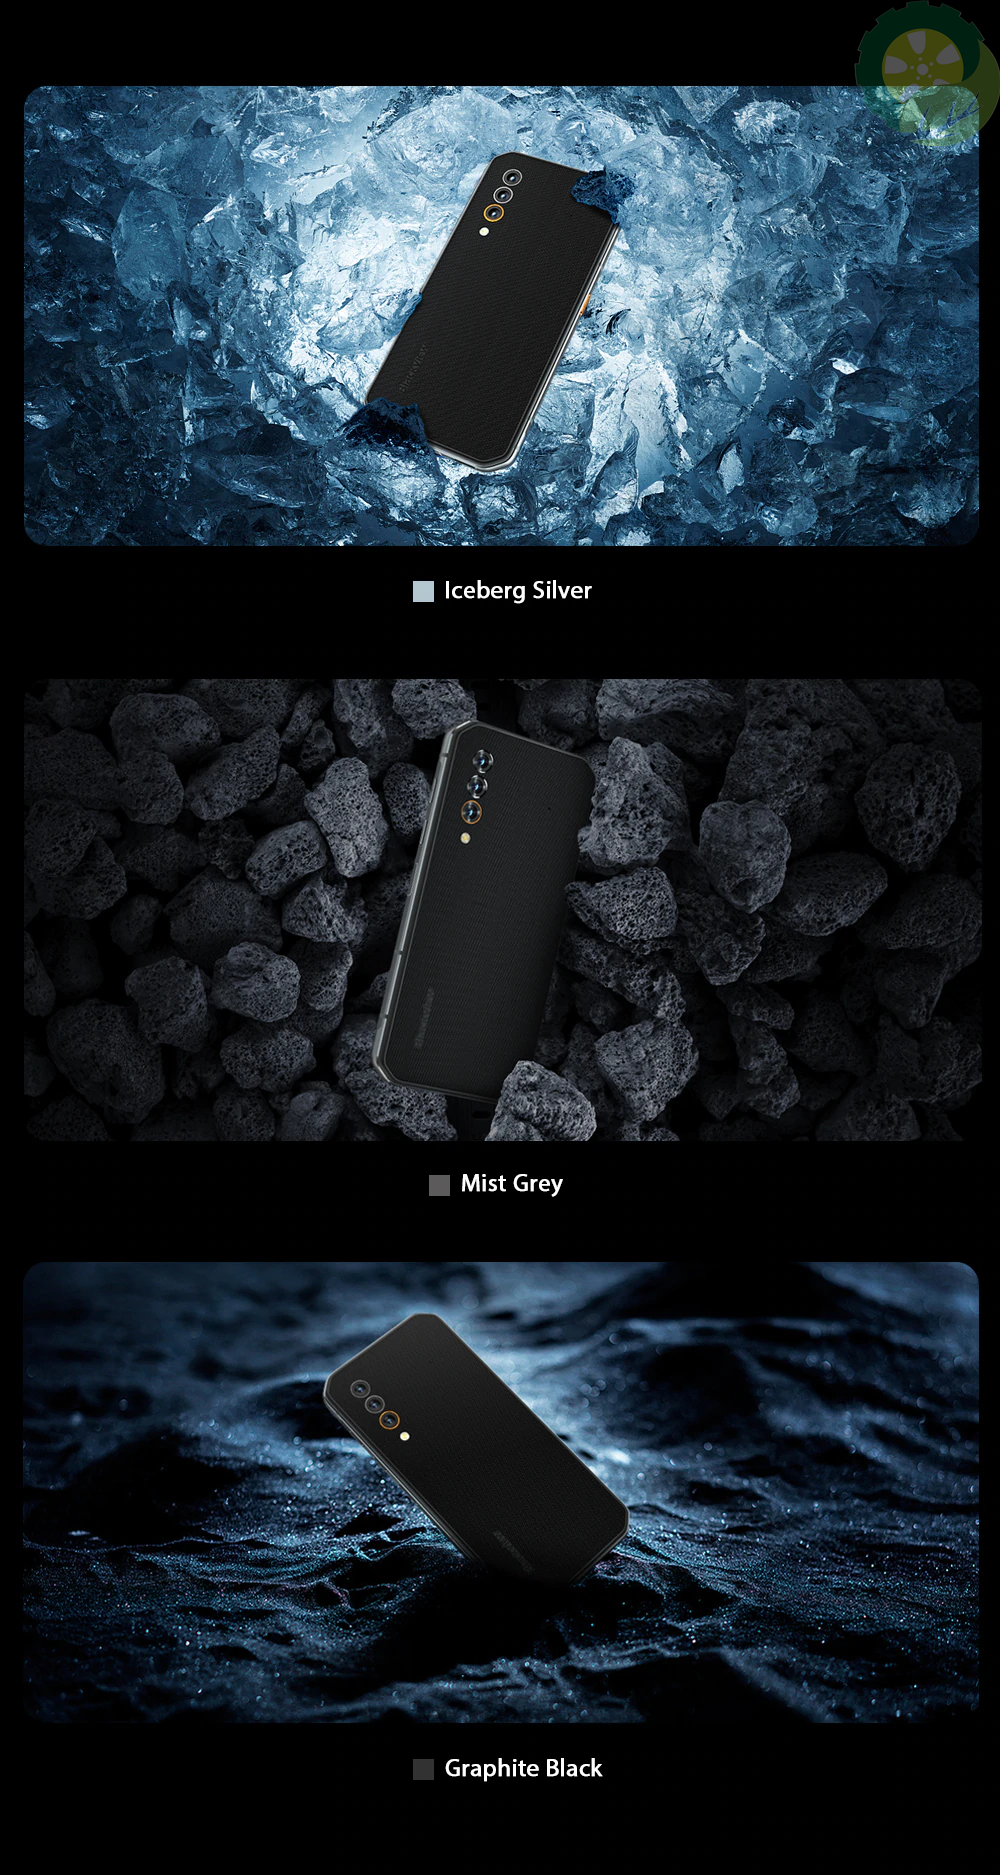 Blackview BL6000 Pro 5G Phone IP68 Waterproof 48MP Triple Camera 8GB RAM 256GB ROM 6.36 Inch FHD+ Global Version 5G Mobile Phone TIANTIAN LIFE Market Place